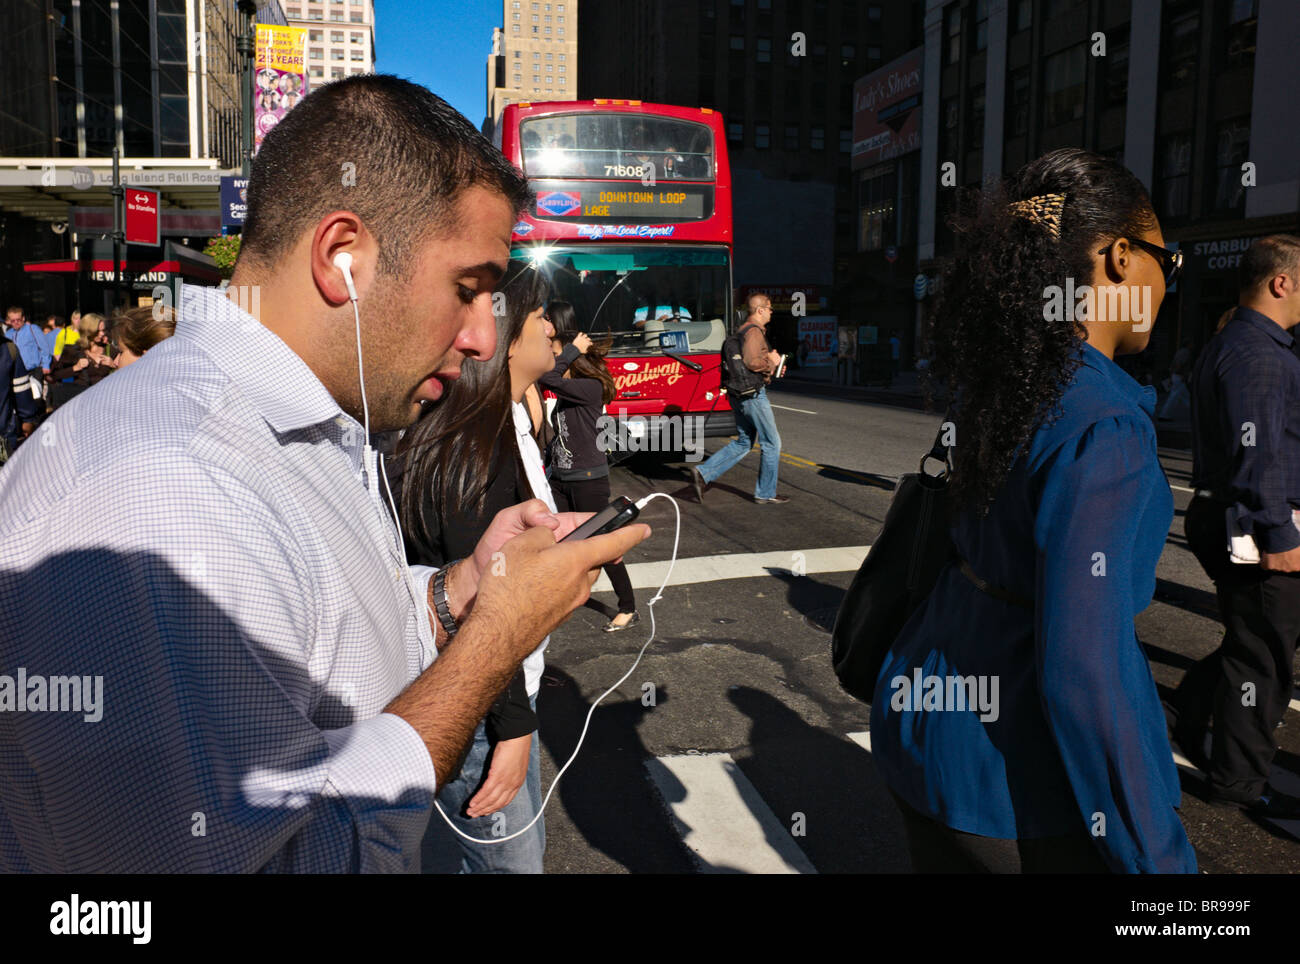 Man walking across crowded street while operating hand-held device. Stock Photo